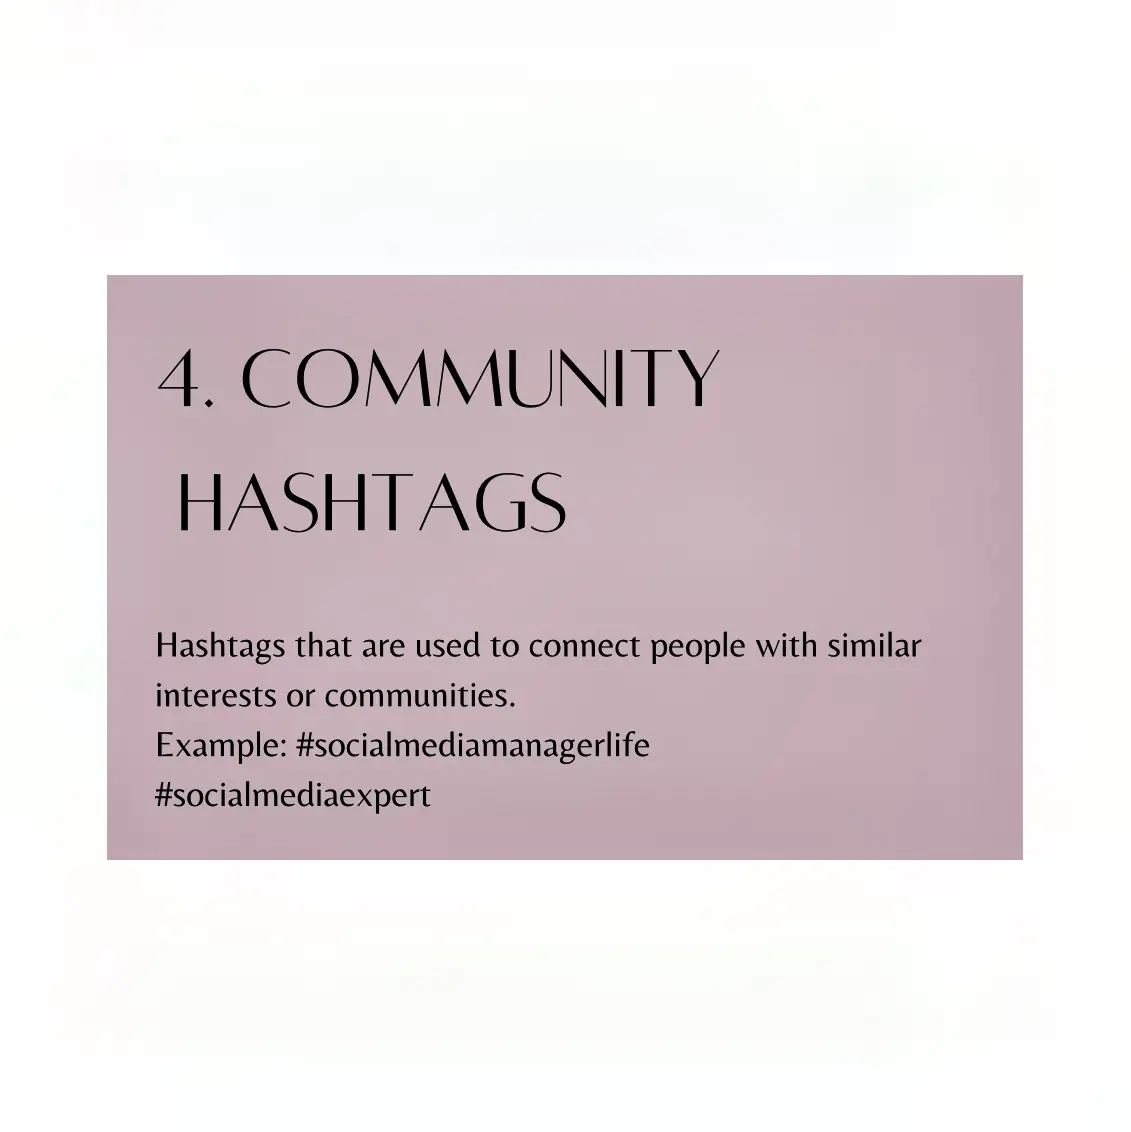  A list of hashtags used to connect people with similar interests or communities.